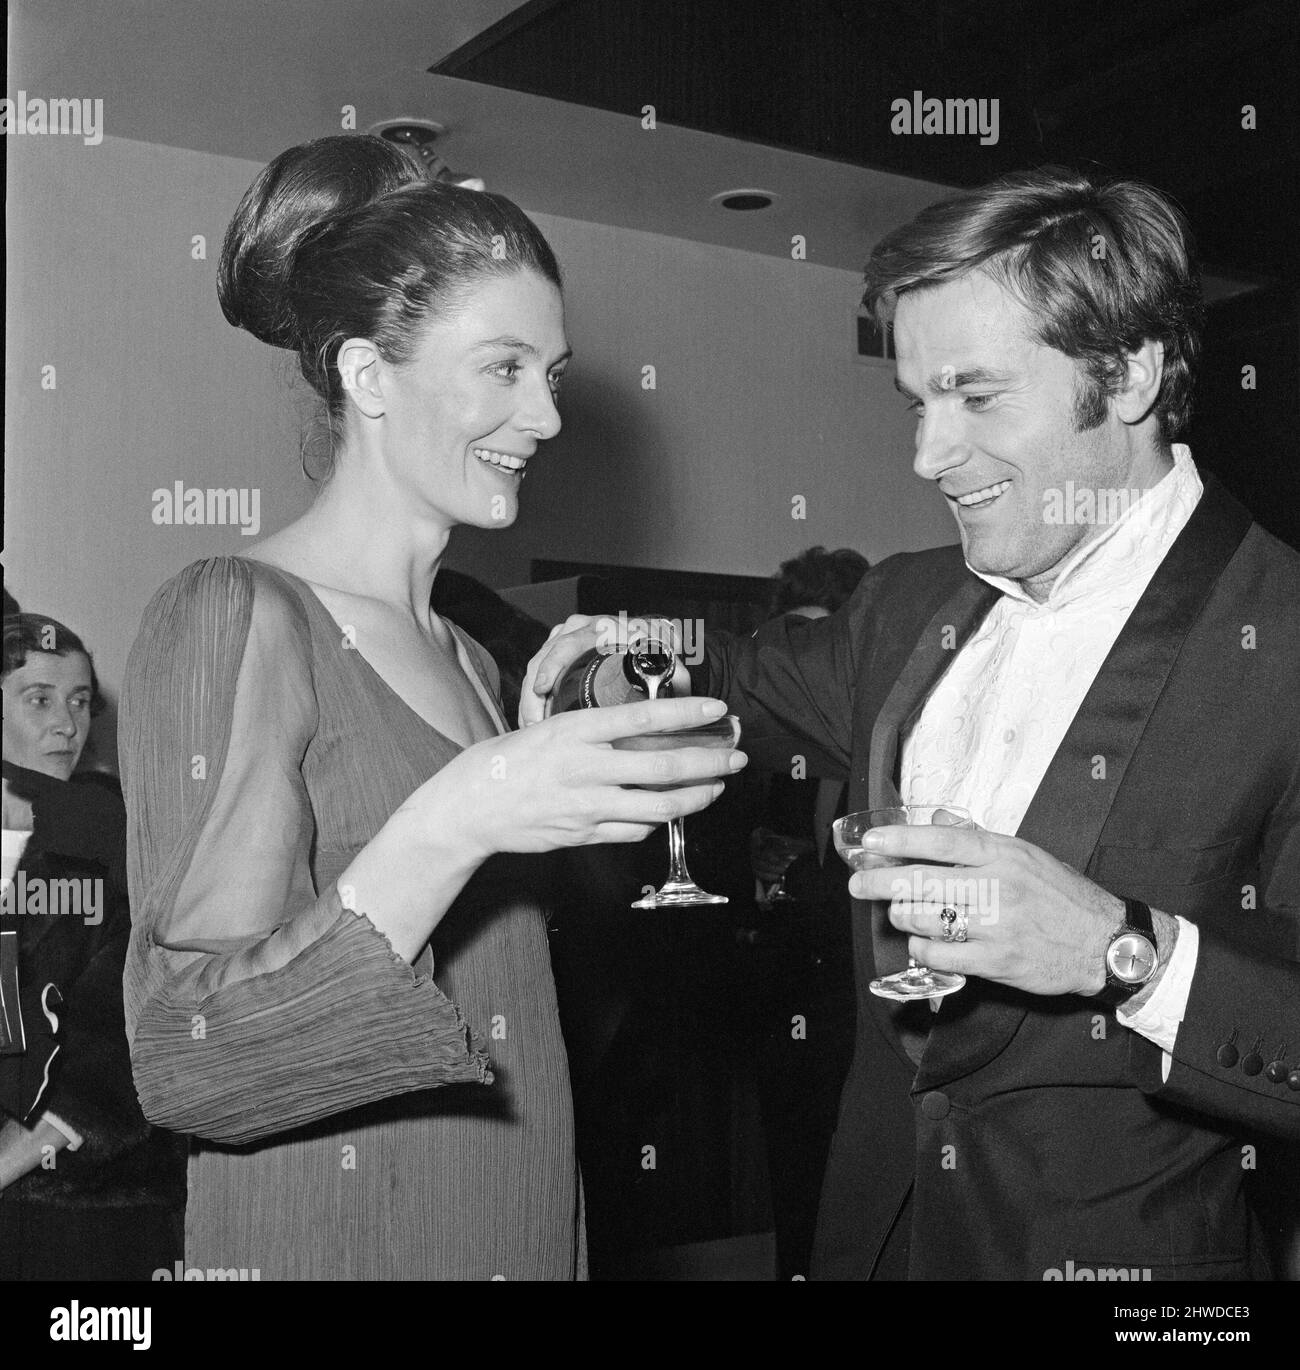 The was a romantic surprise awaiting actress Vanessa Redgrave after the gala opening of her new play 'Daniel Deronda' for her boyfriend, Italian film star Franco Nero, flew in secretly from Rome Especially to see her at the Manchester University Theatre. 14th January 1969. Stock Photo